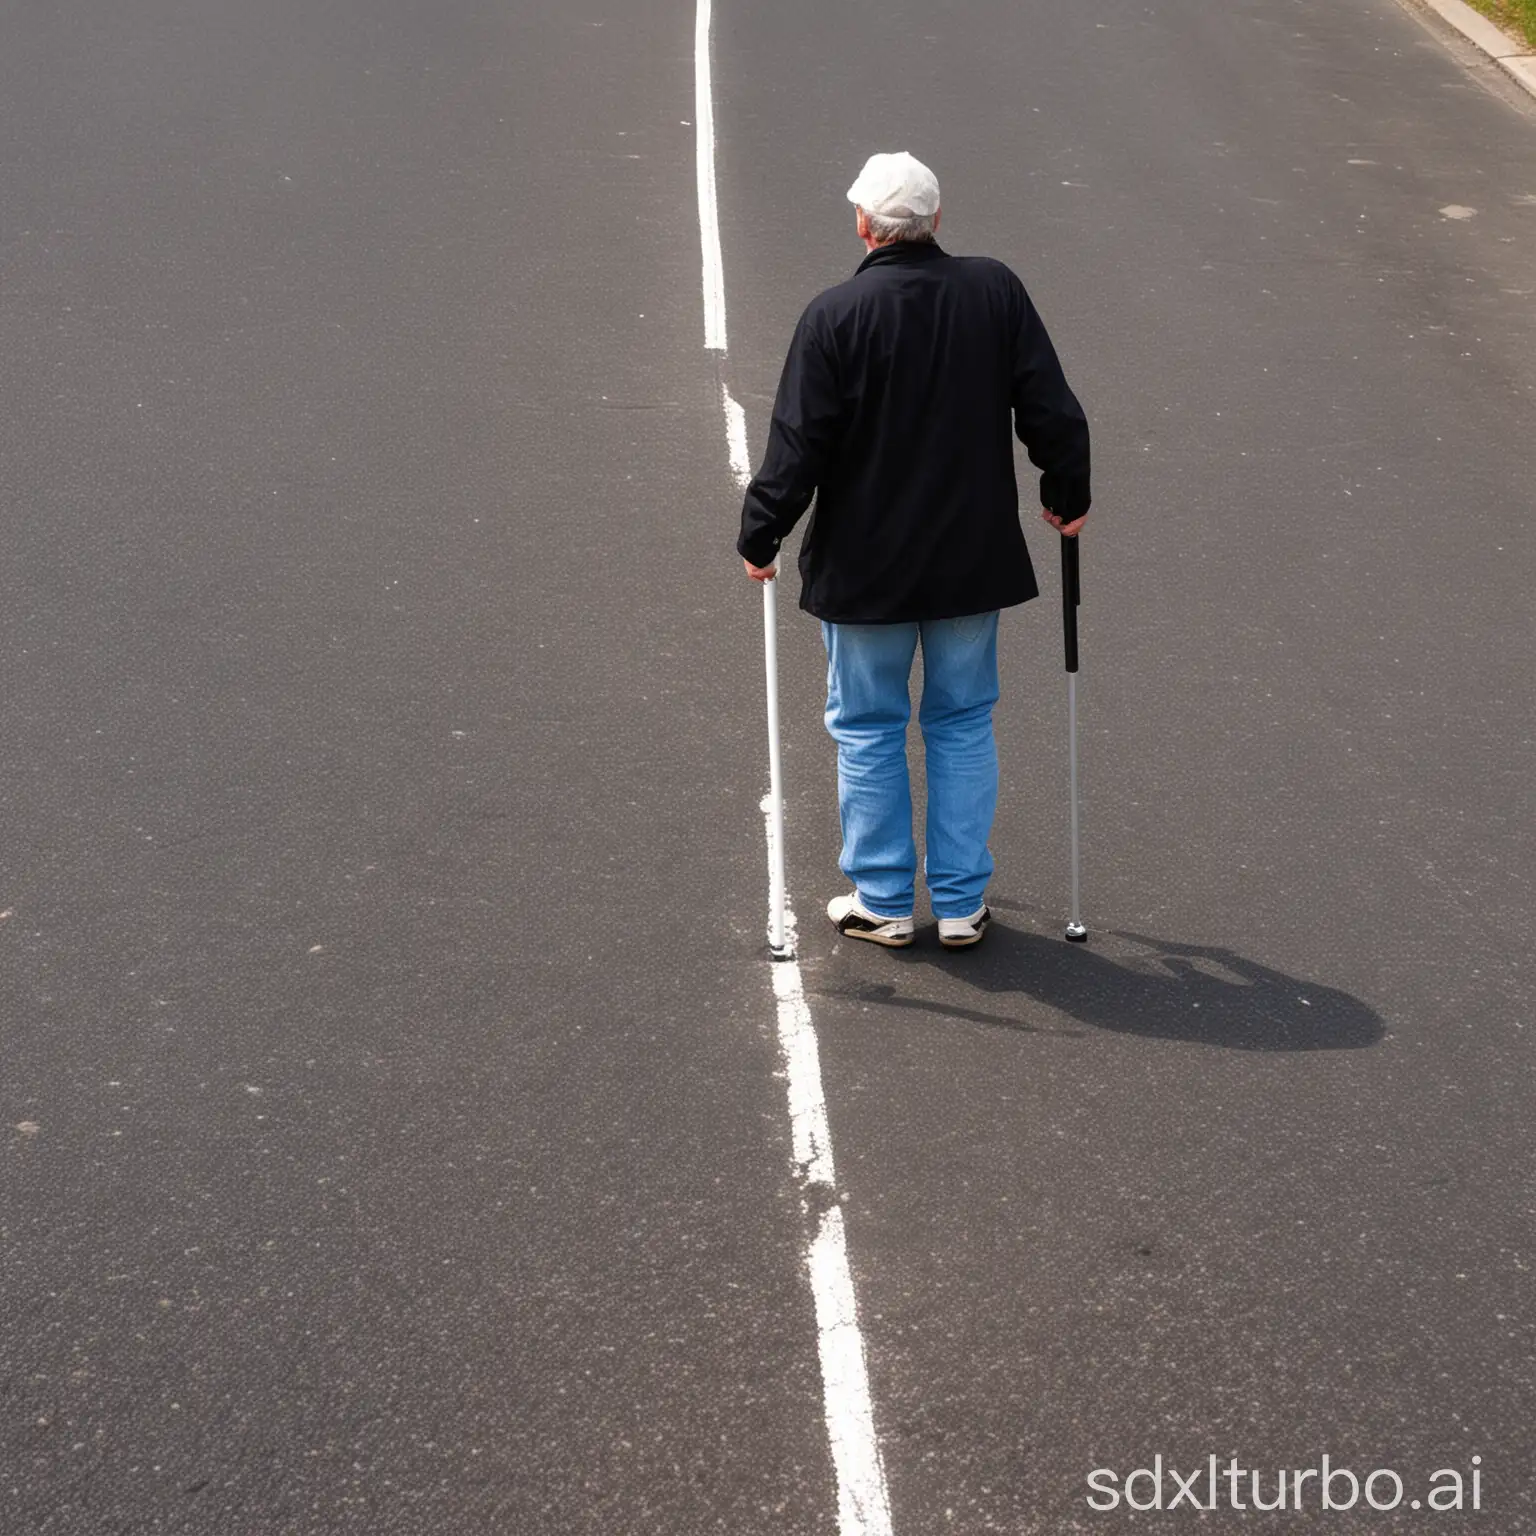 Blind-Person-with-White-Cane-Walking-on-Road